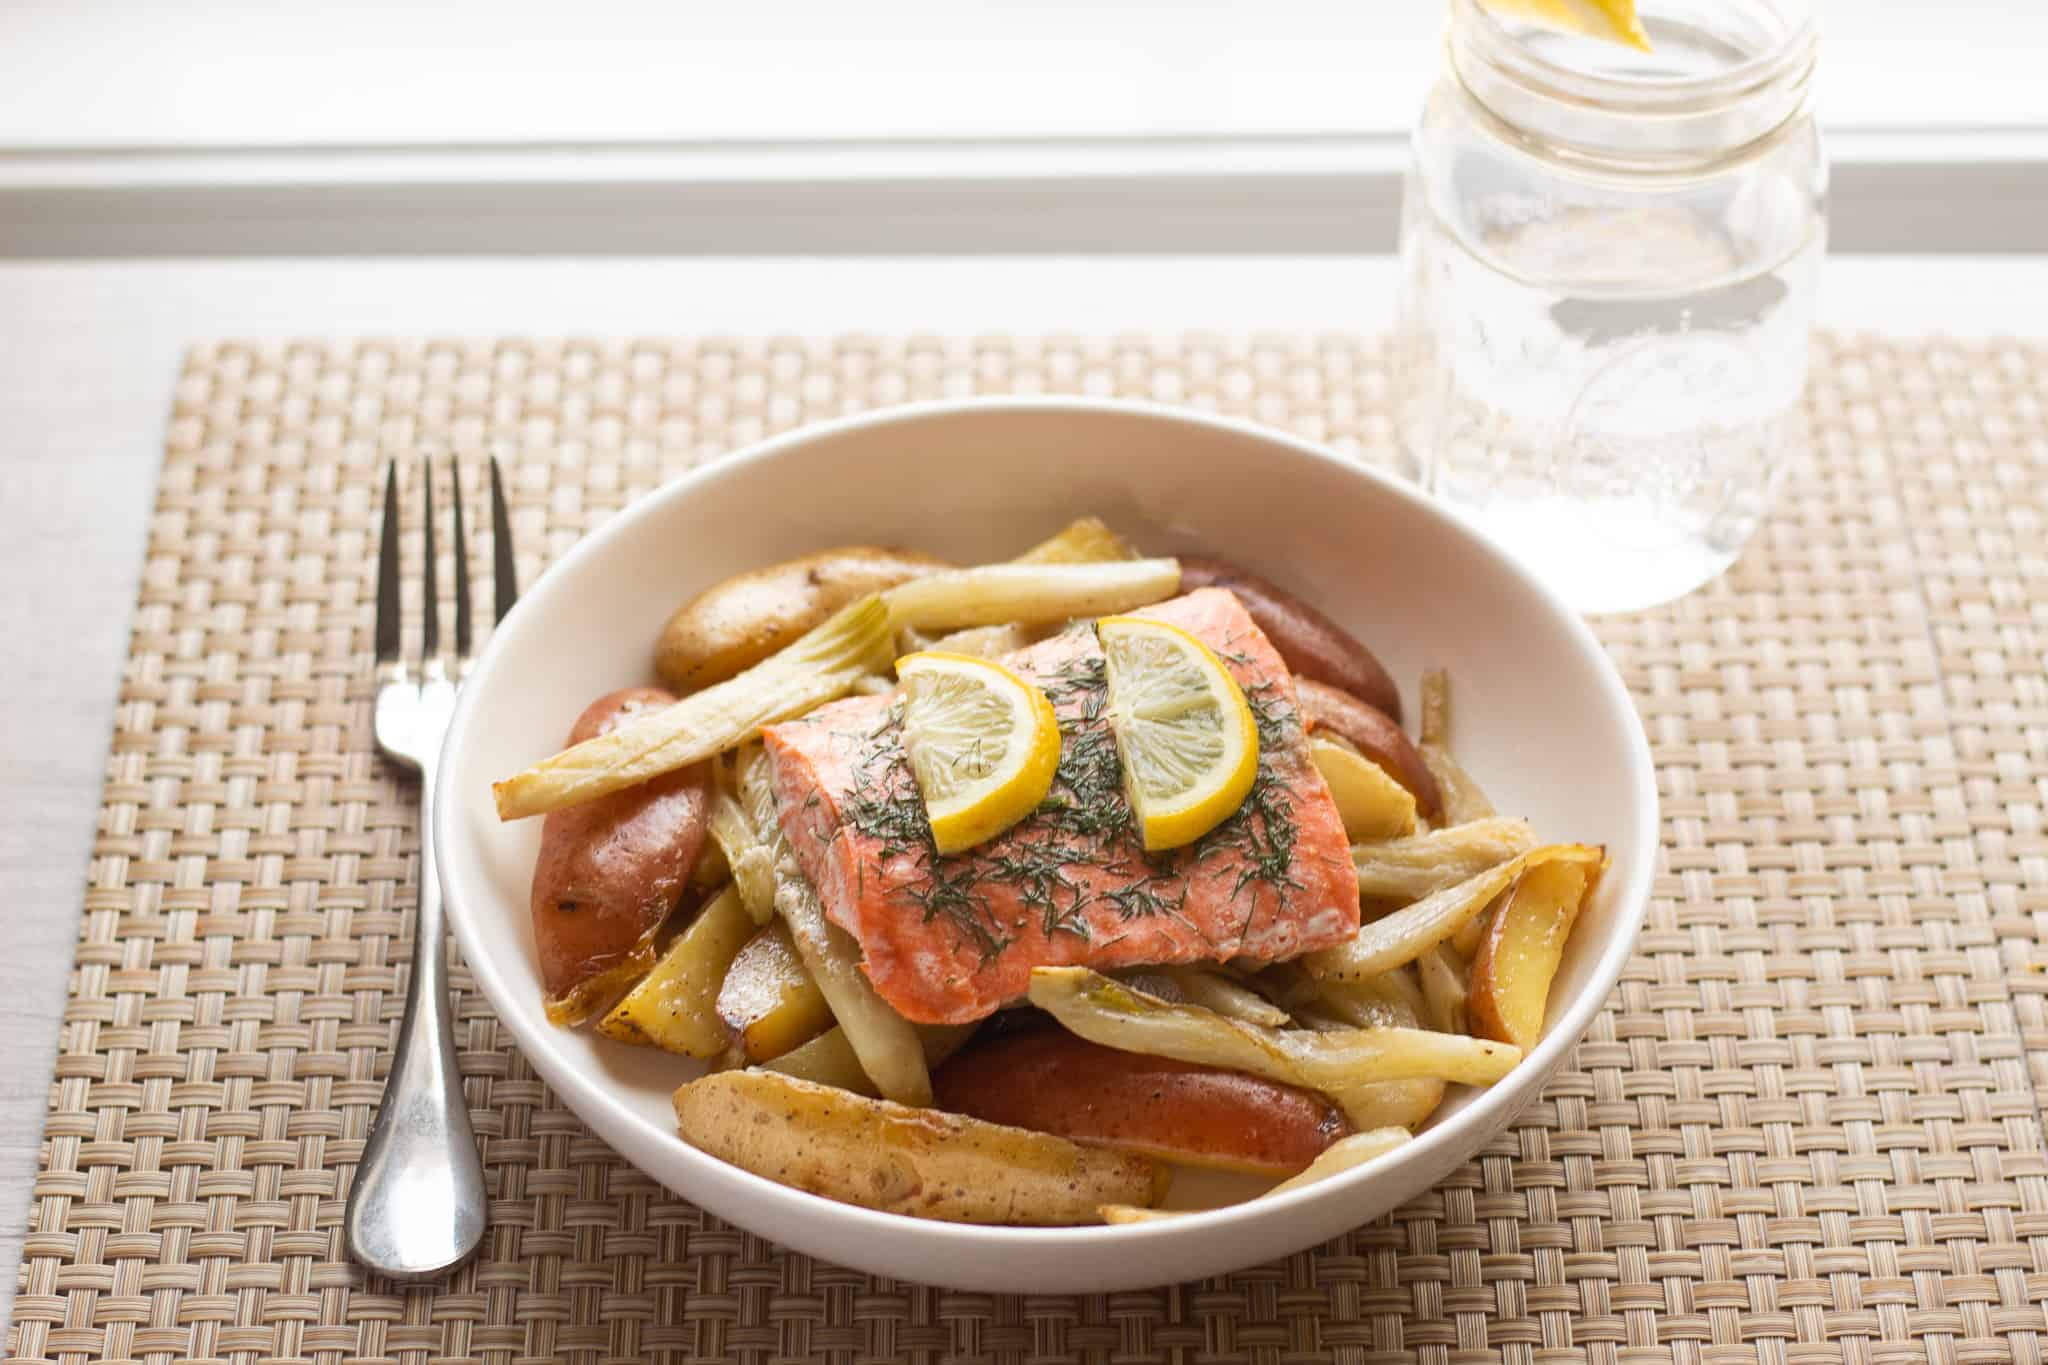 Plate of lemon topped salmon sitting on top of roasted fennel and potatoes.